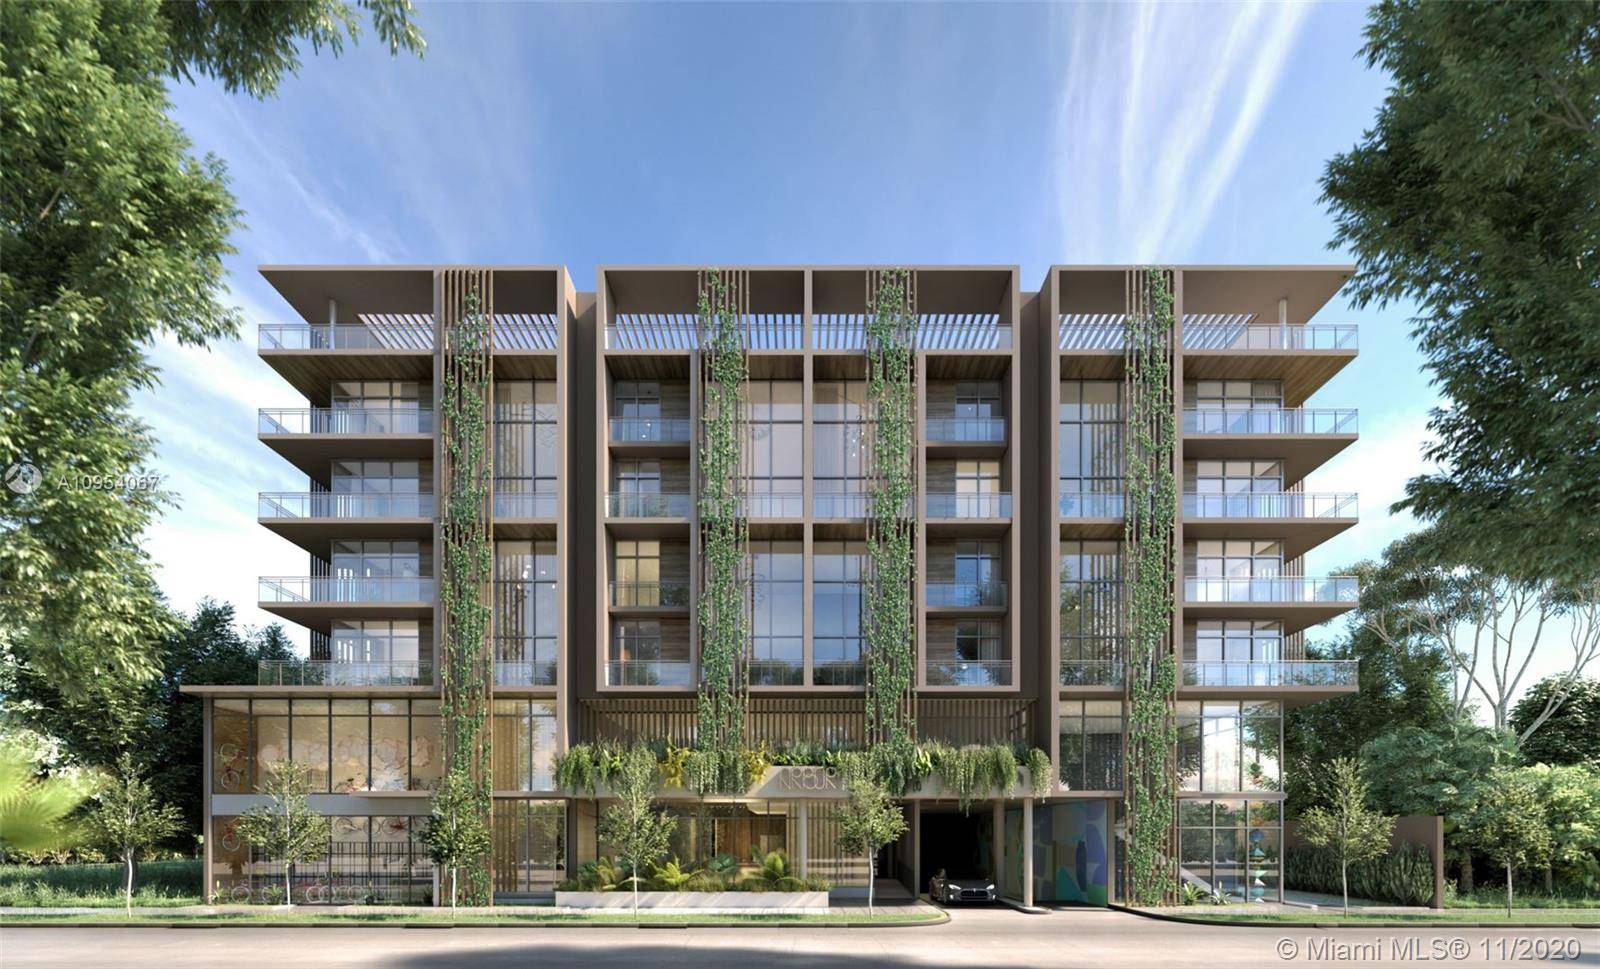 Arbor Residences is a leafy retreat nestled in the heart of Coconut Grove, walking distance to CocoWalk, Mayfair Shops, and waterfront living.